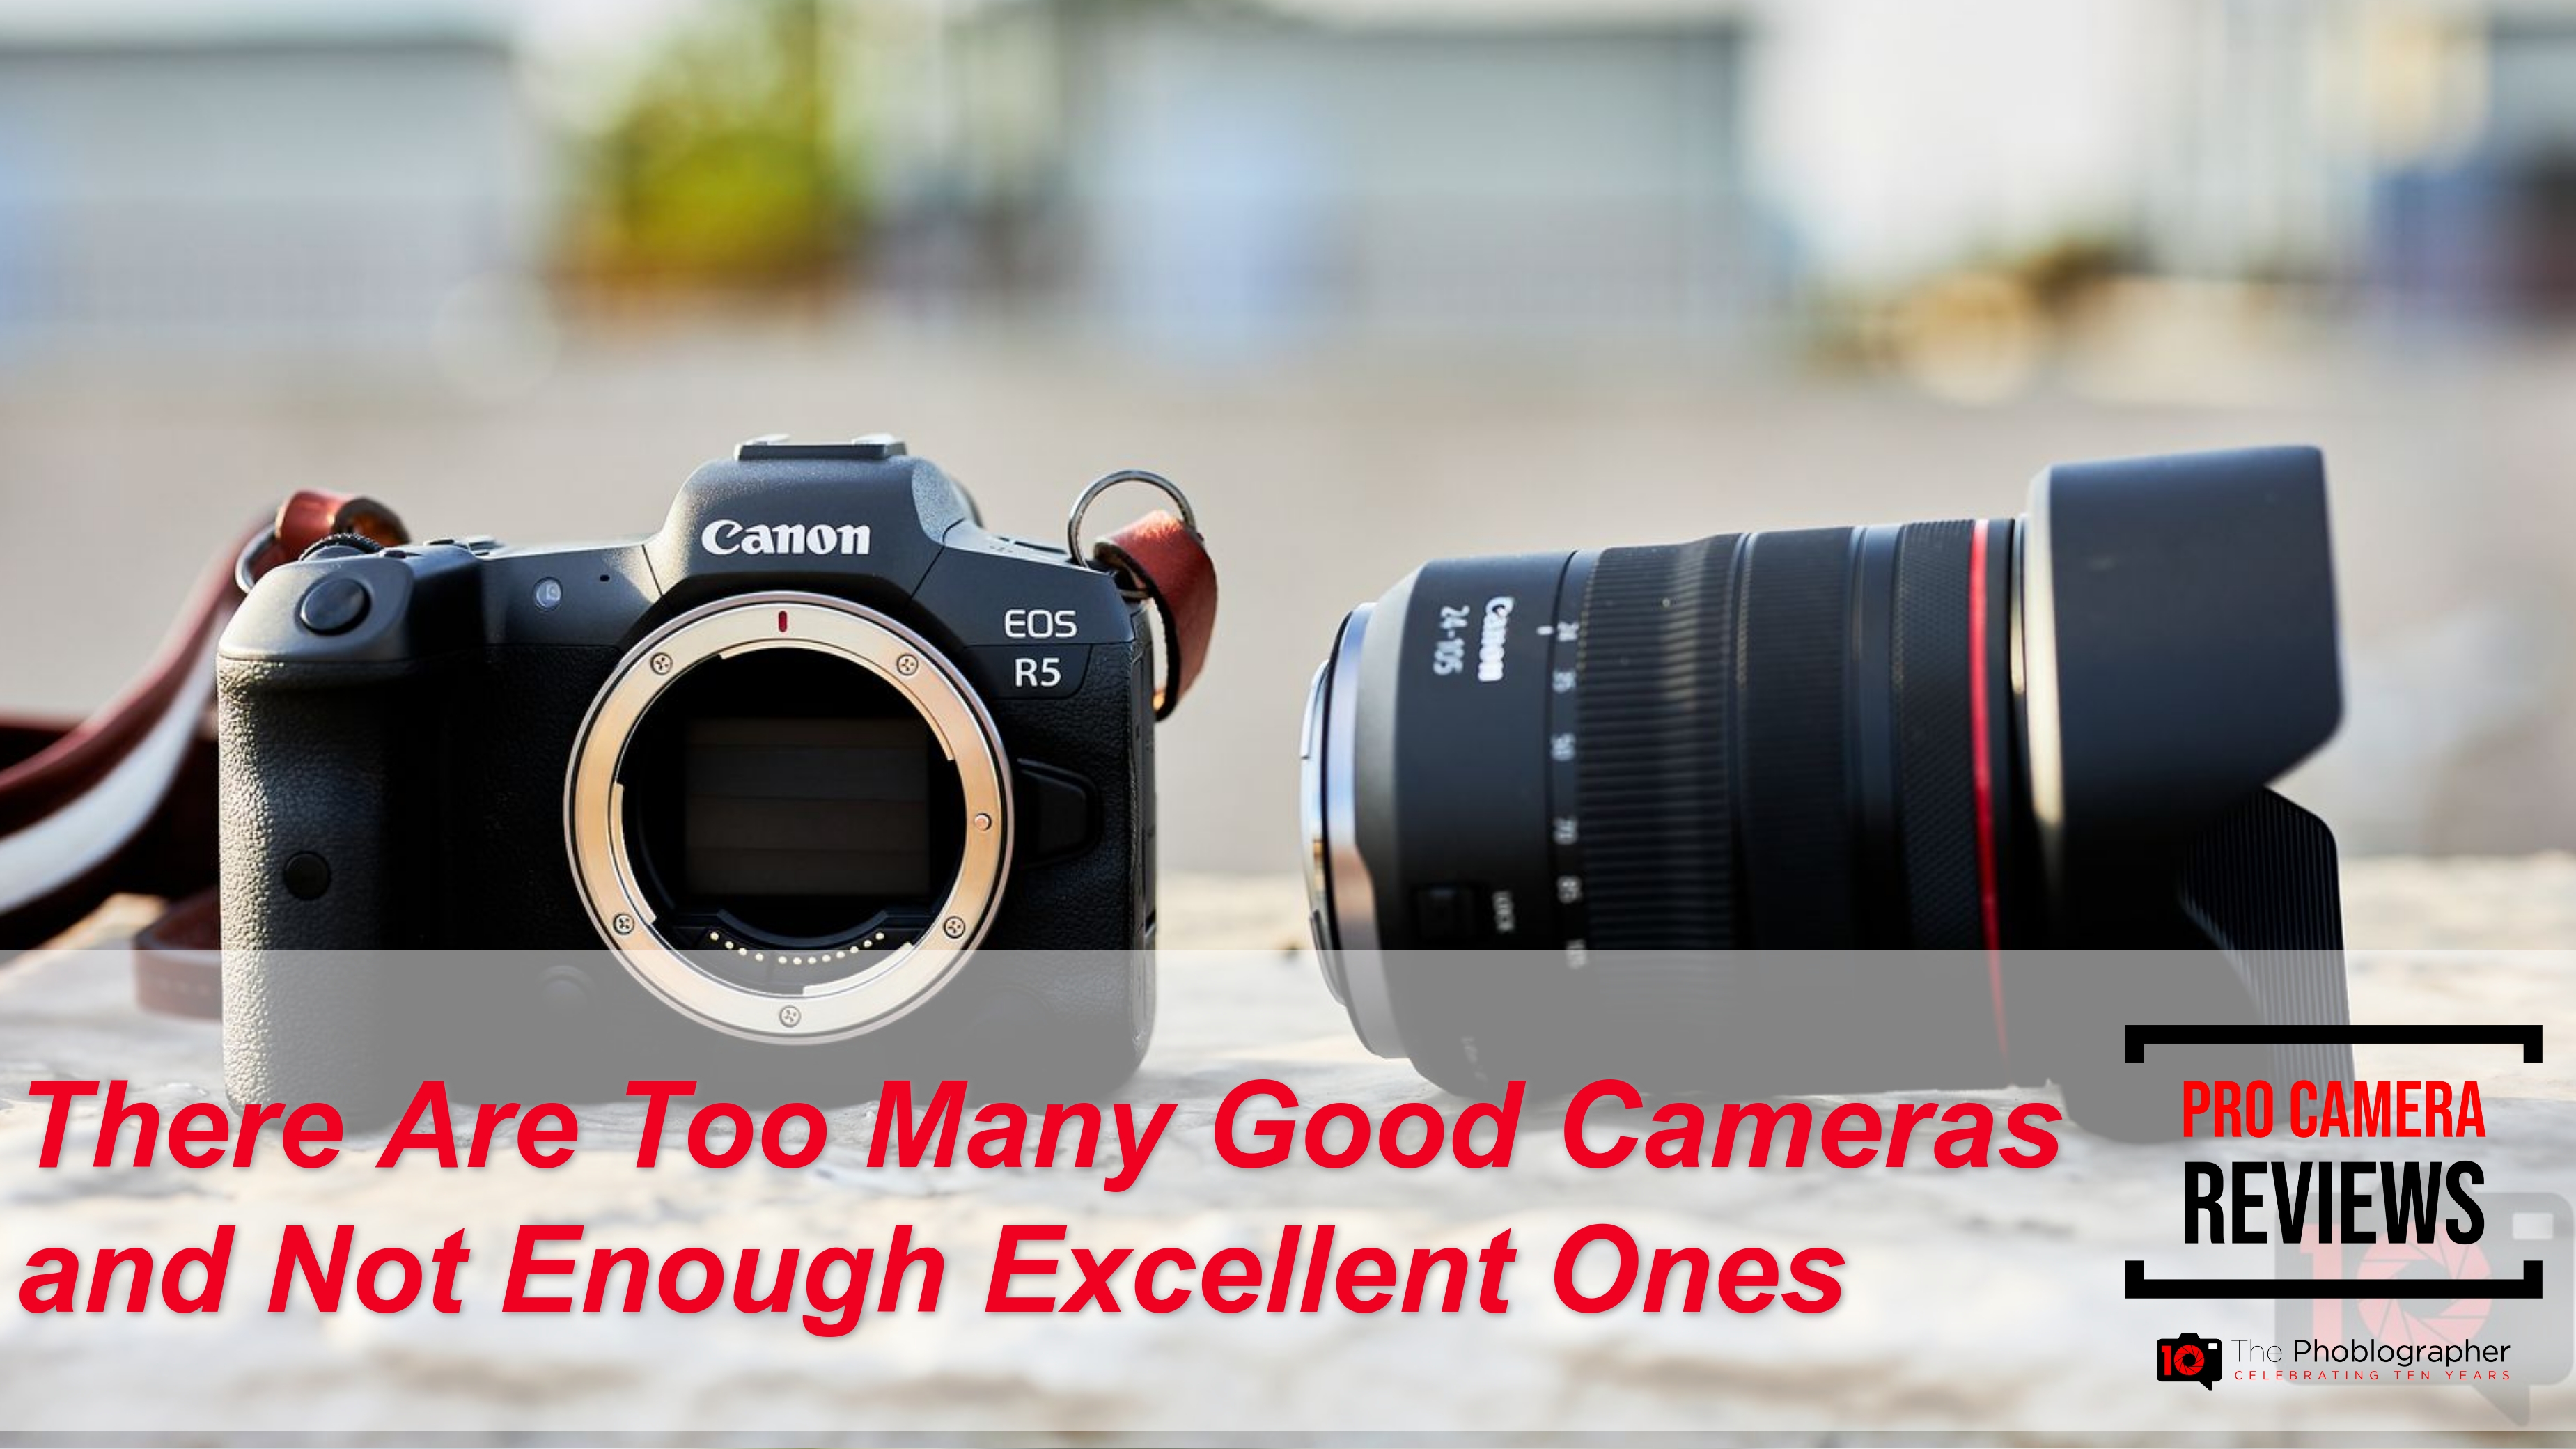 There-Are-Too-Many-Good-Cameras-and-Not-Enough-Excellent-Ones (1)